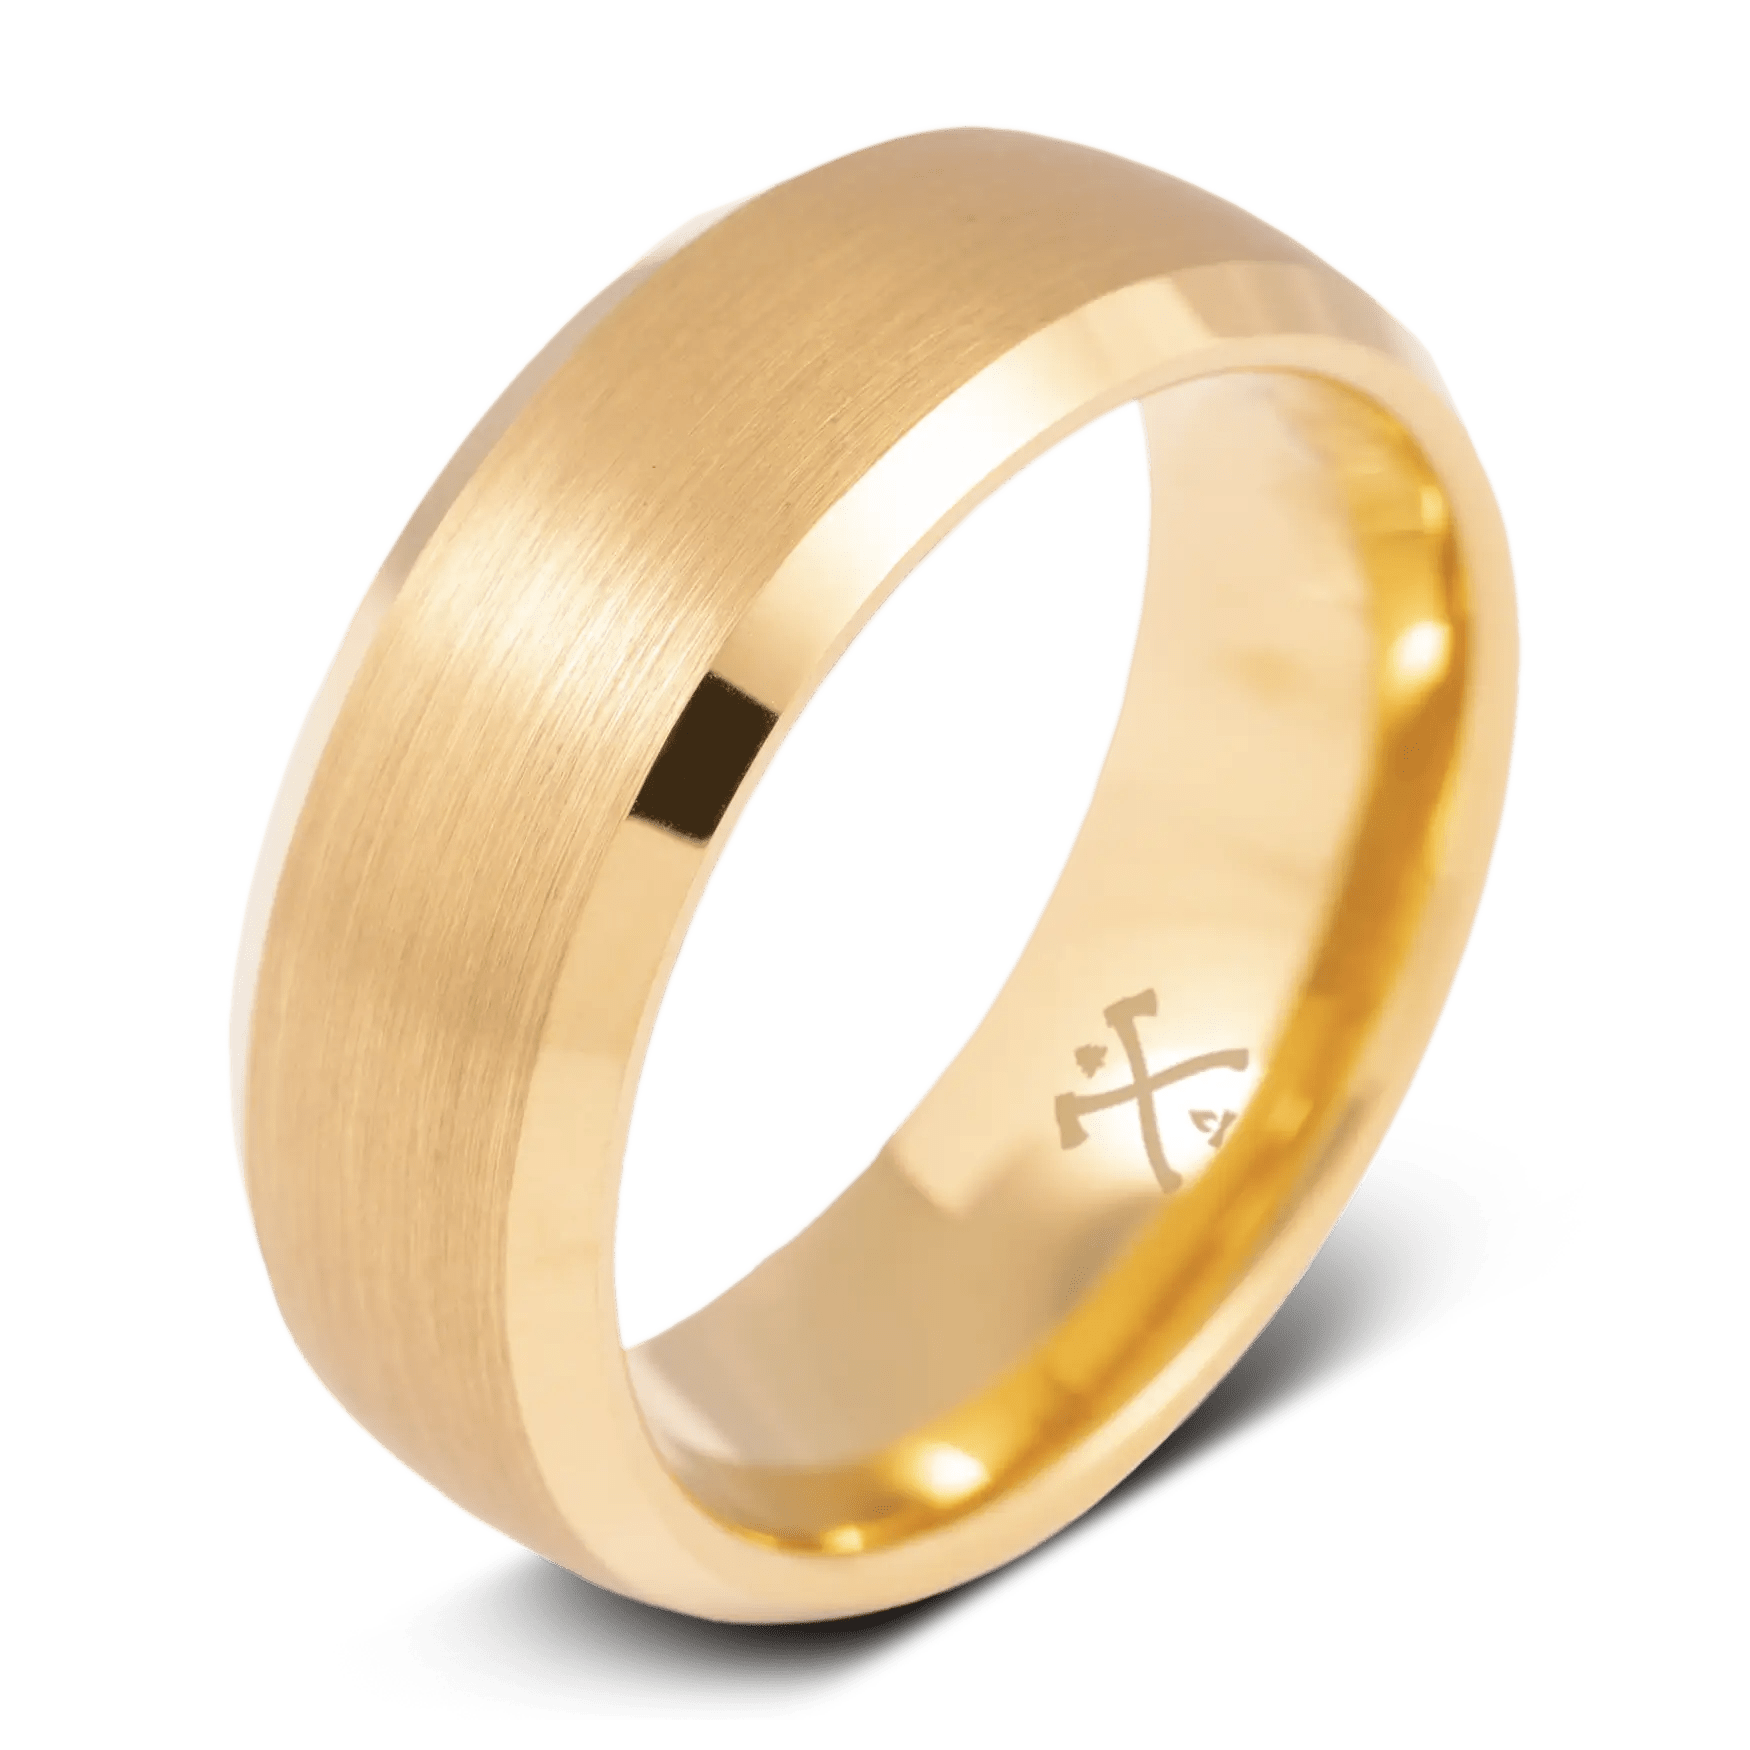 The CEO - Men's Gold Tungsten Wedding Ring | Manly Bands